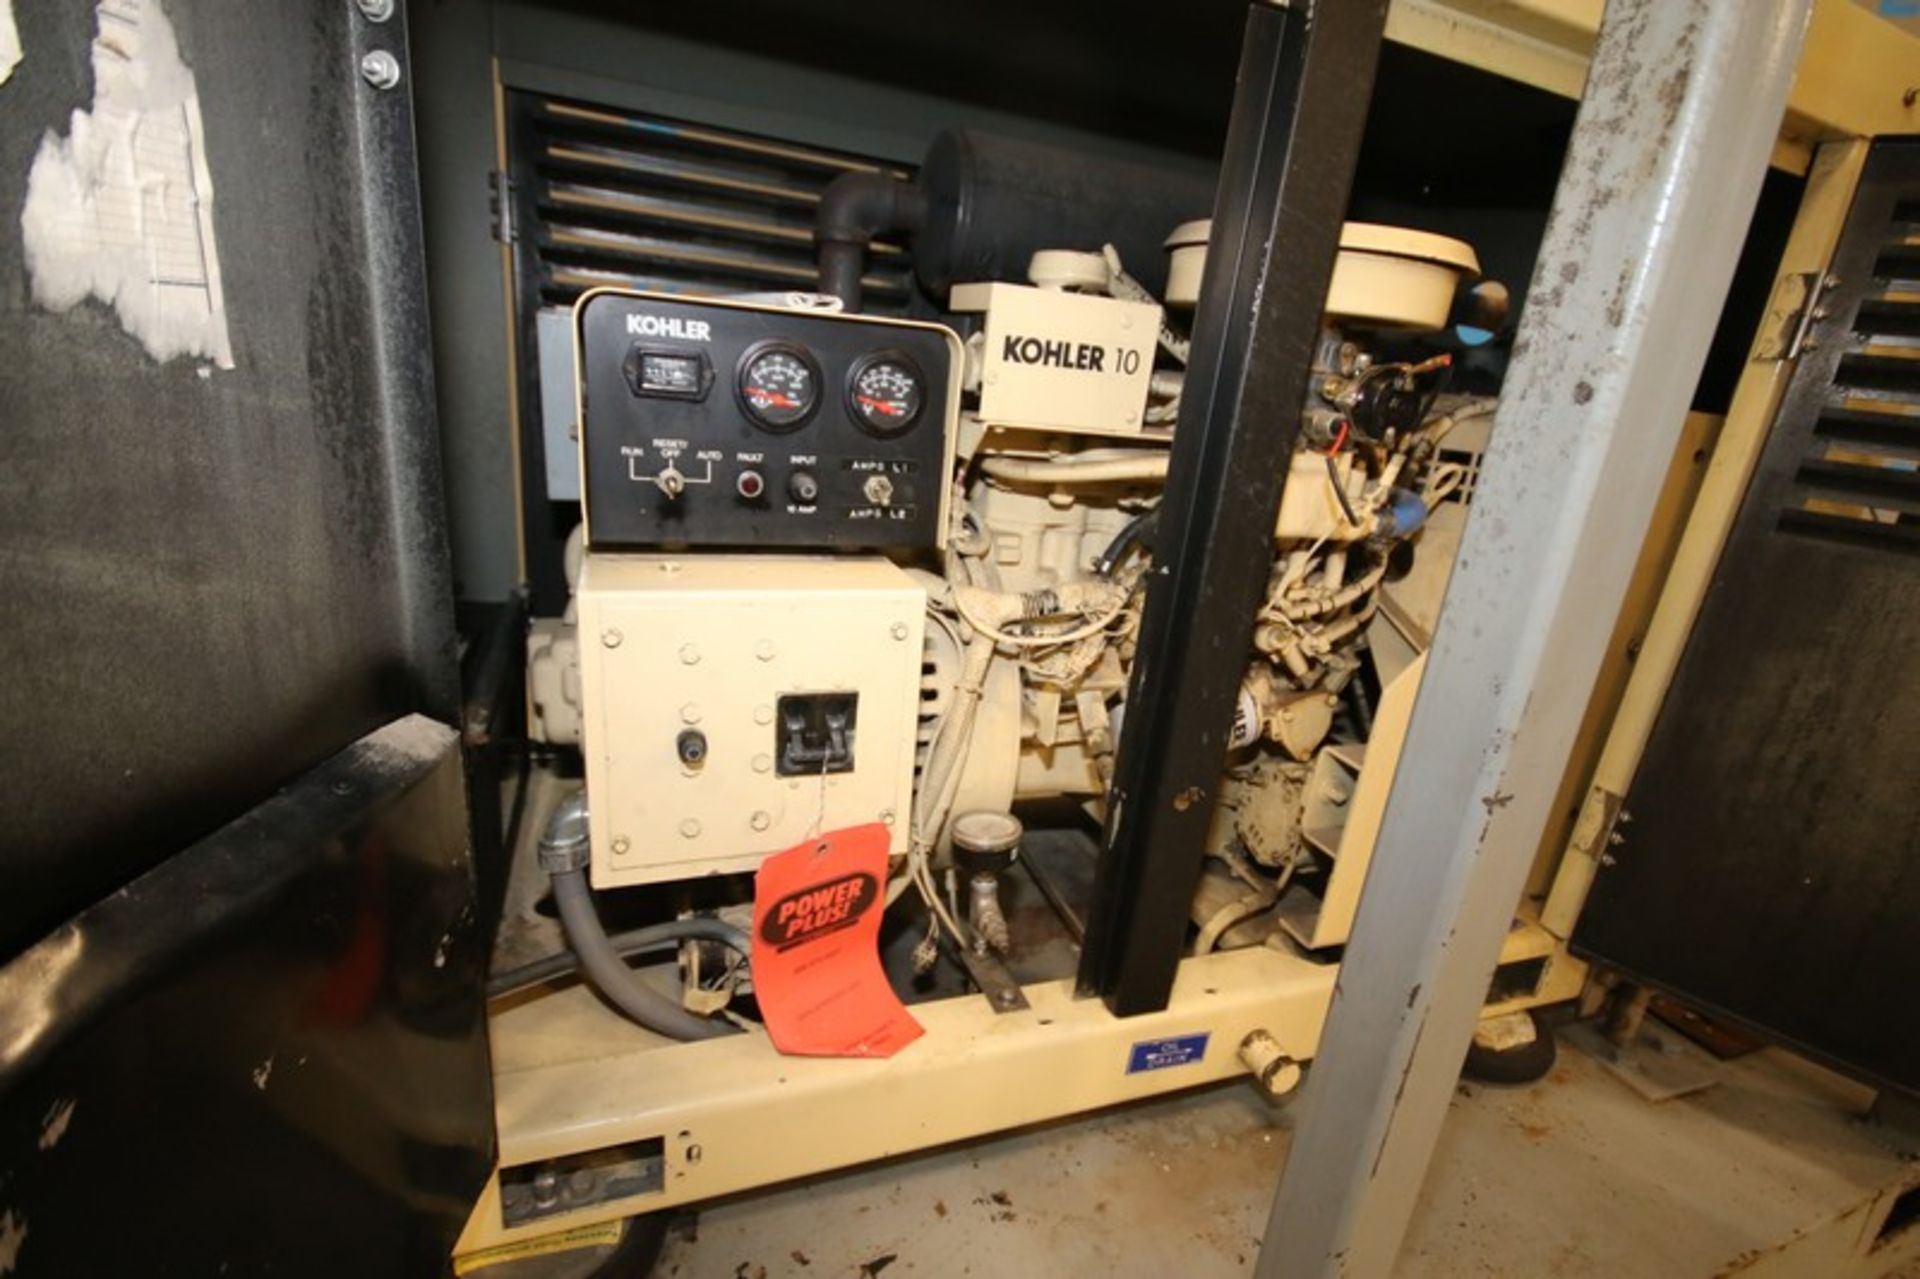 Kohler 10 KVA Gas Portable Generator, Model 10RY61, SN 25687103, with Ford 4 Cylinder Gas Engine, - Image 5 of 11